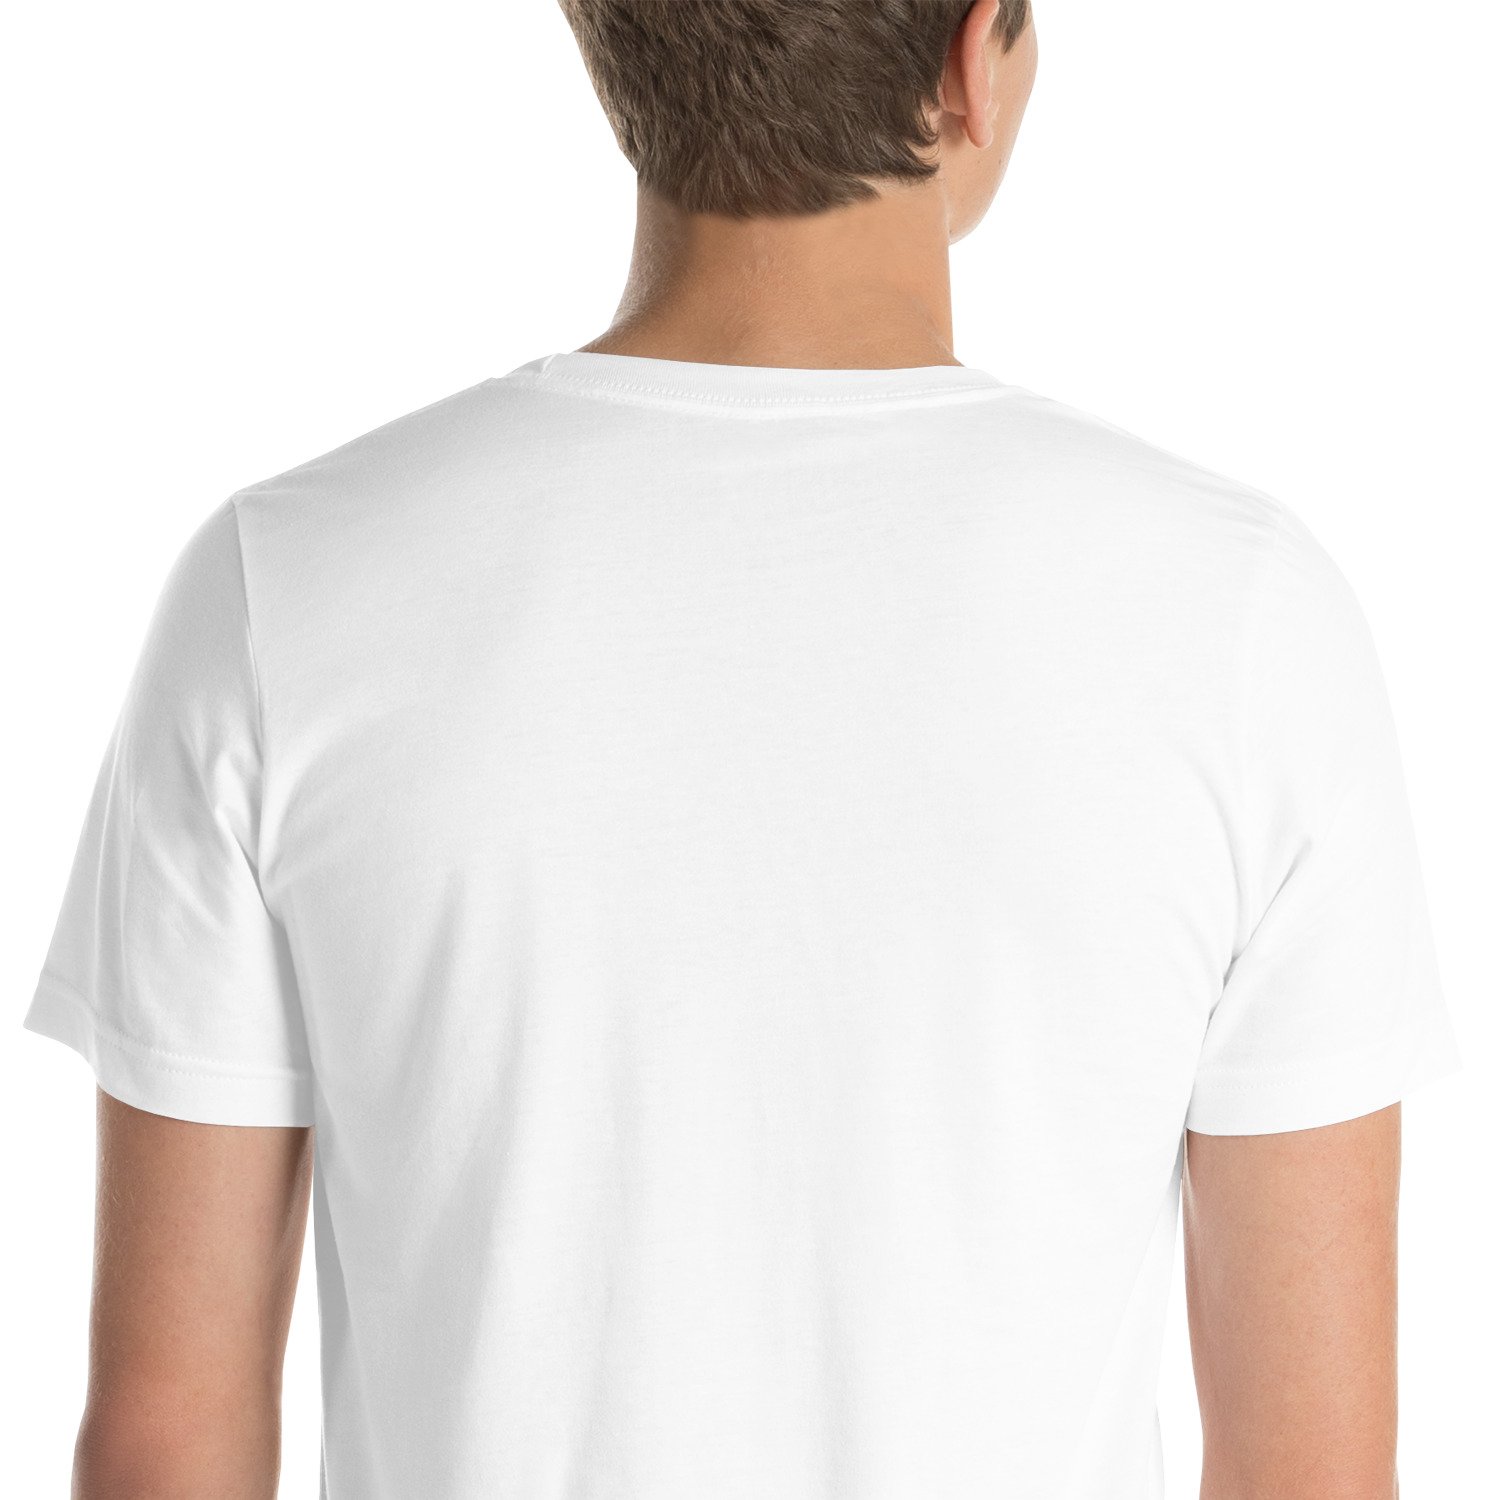 Classic – Online Drop T-shirt Name Naropa Unisex Store